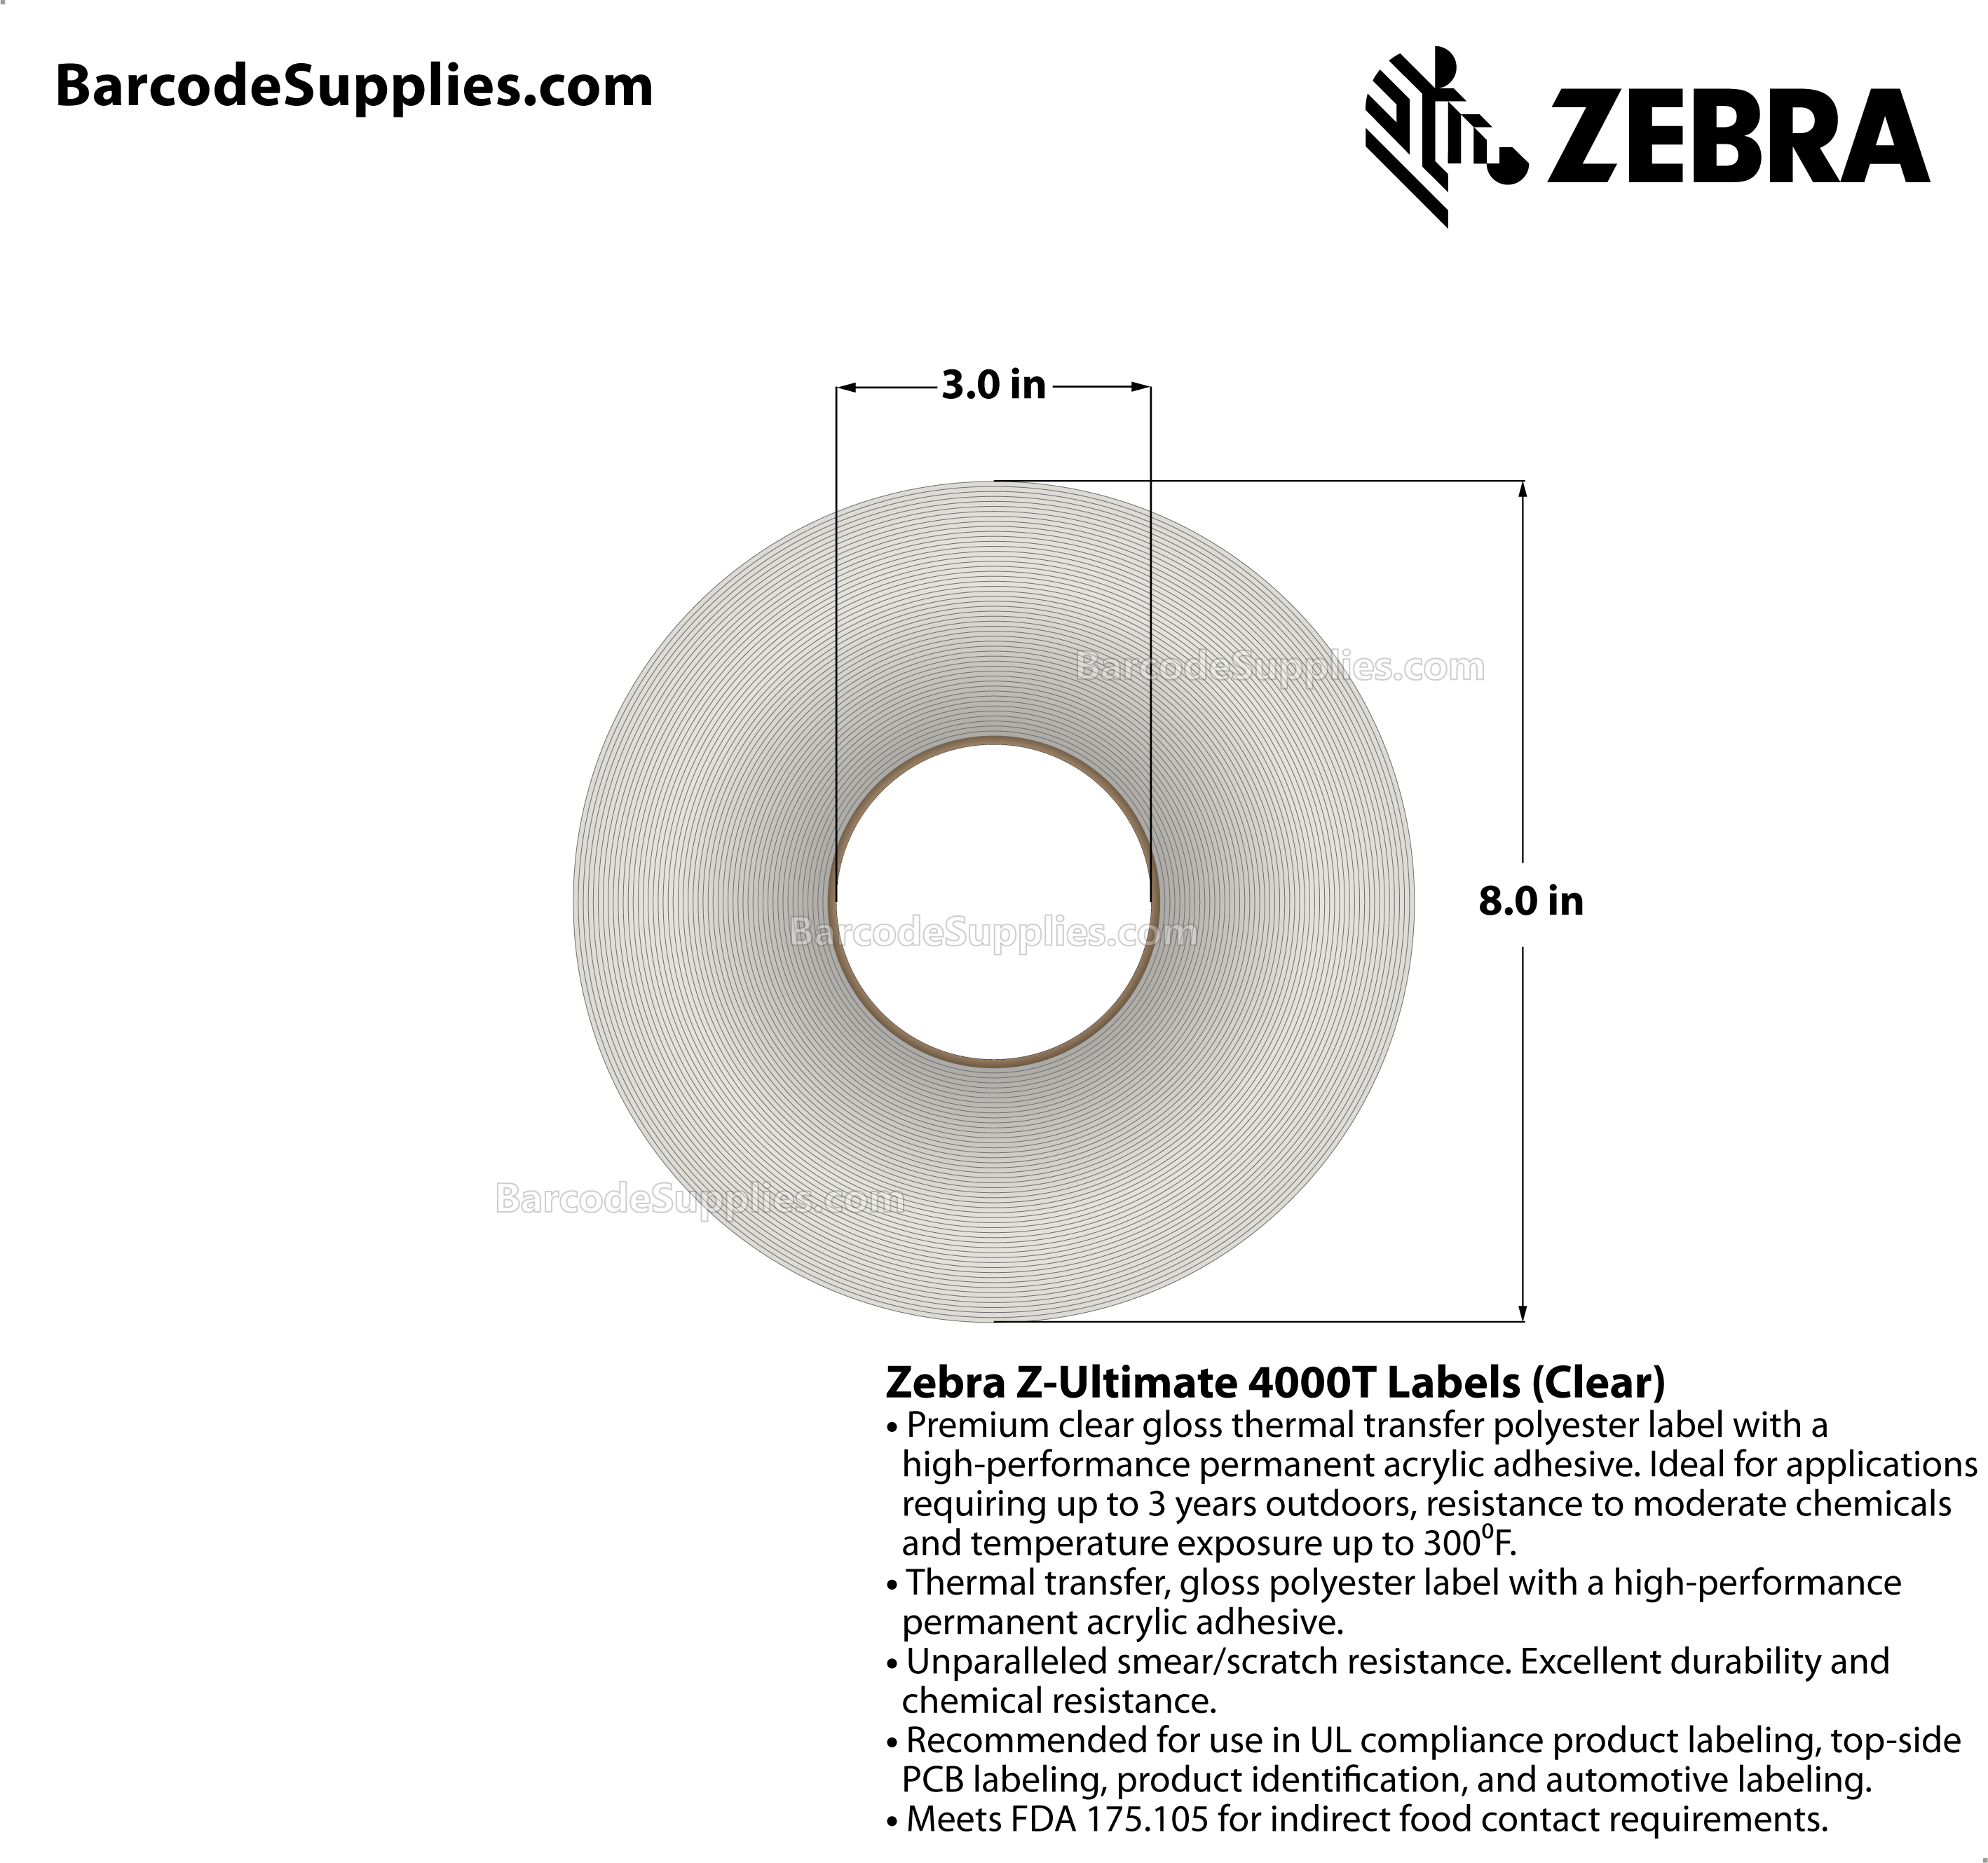 1 x 0.5 Thermal Transfer Clear Z-Ultimate 4000T Clear (3-Across) Labels With Permanent Adhesive - Notch sensing - Perforated - 10002 Labels Per Roll - Carton Of 1 Rolls - 10002 Labels Total - MPN: 10023043